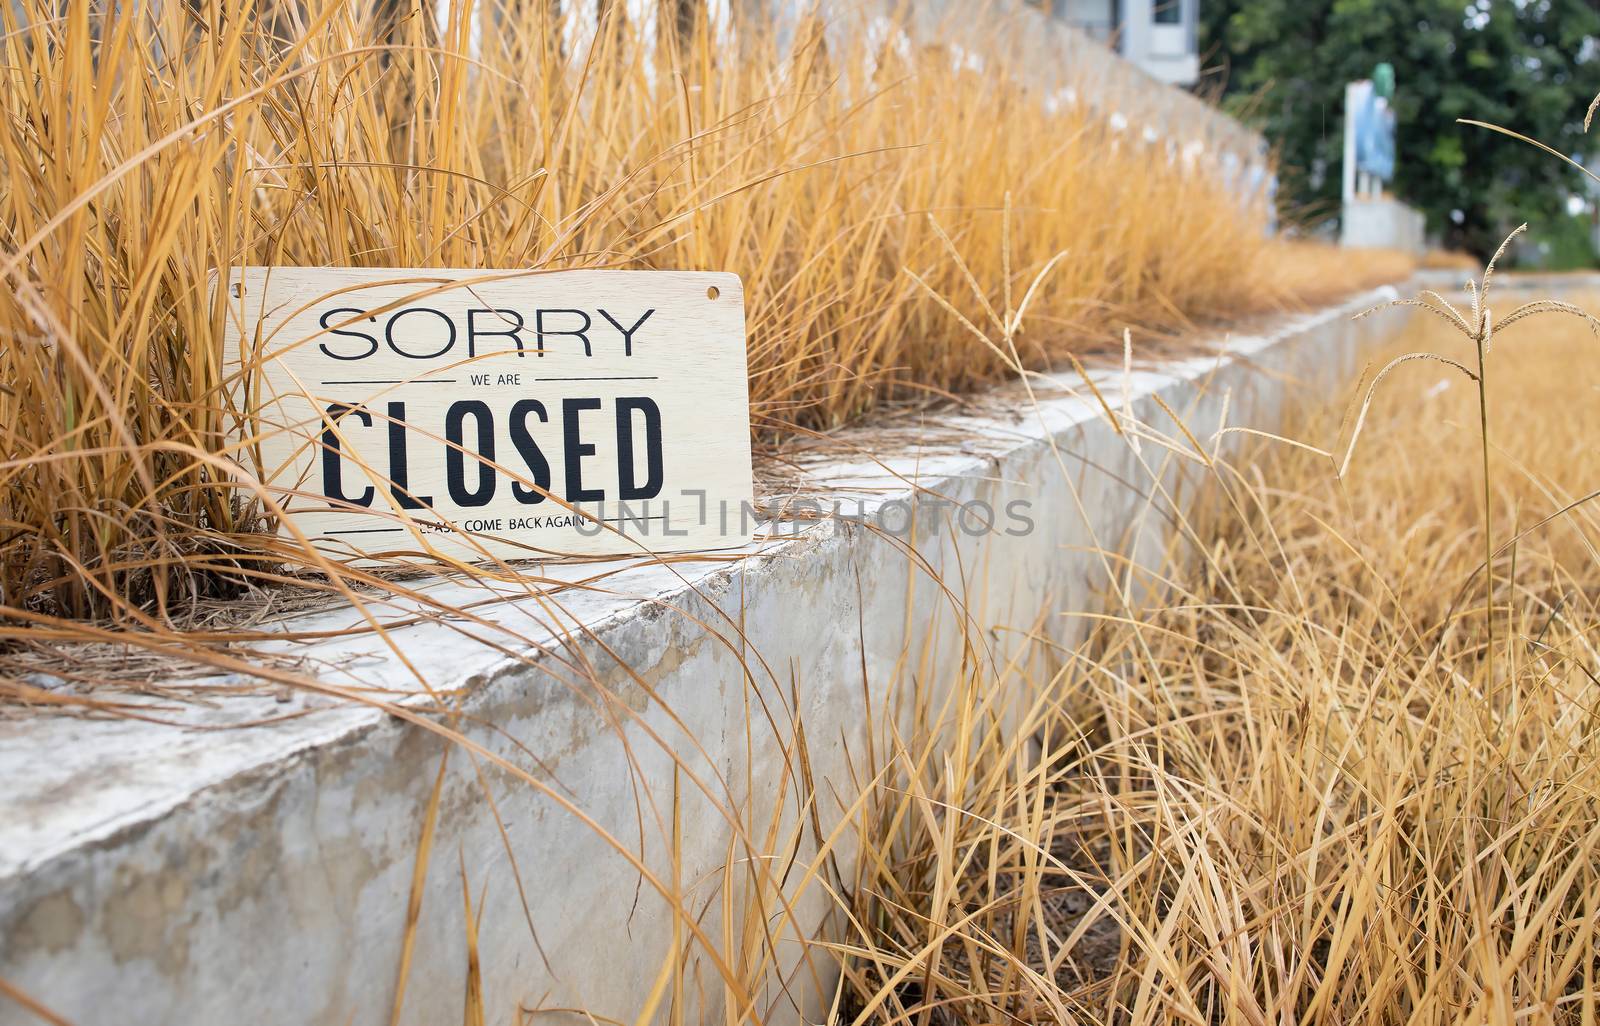 Sorry we're closed sign on an abandoned business establishment. Places temporarily closed during coronavirus pandemic.